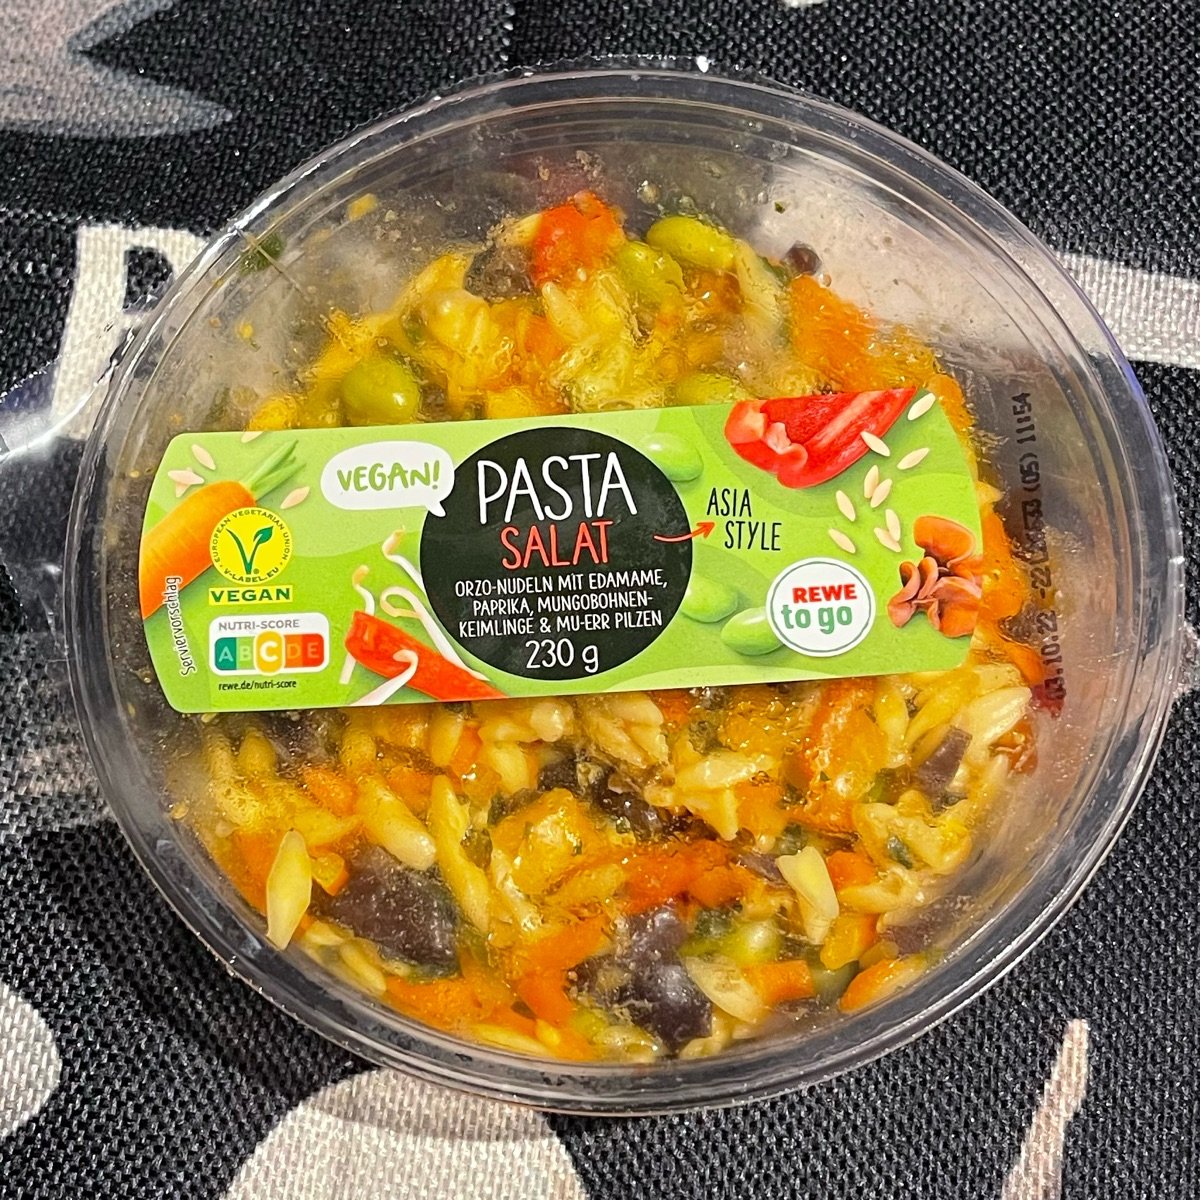 Rewe To Go Pastasalat Review Asia-Style abillion 